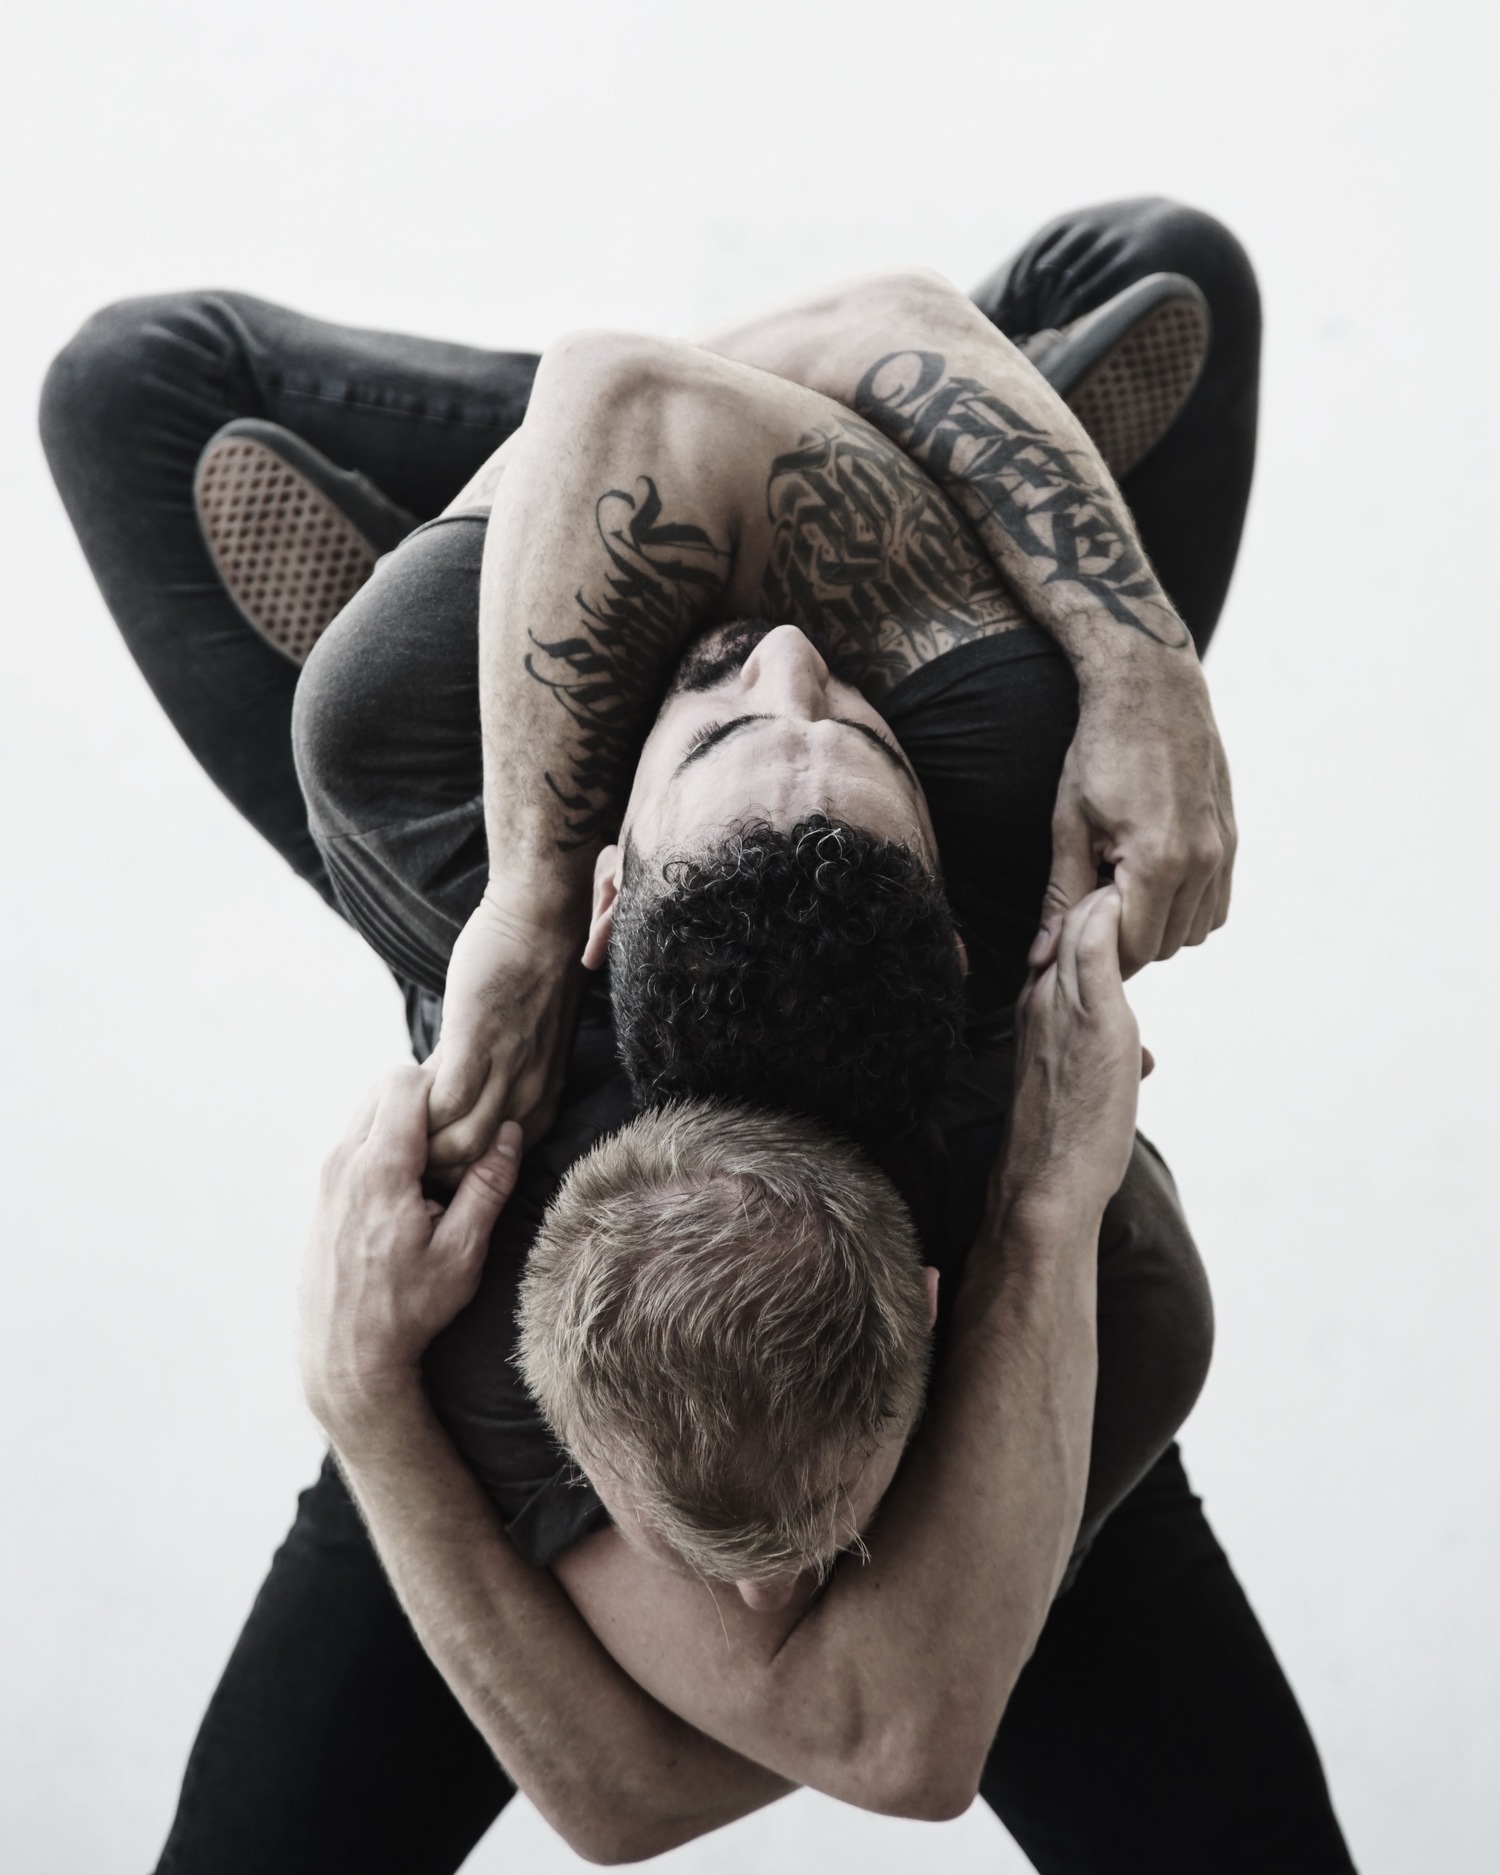 A FUSION OF CONTORTION, HIP-HOP, THREADING, BREAKDANCING AND CONTEMPORARY DANCE. Dance St. Louis kicks off its 53rd season with an arousing presentation of Wewolf, the LA-based company of award-winning international artists James Gregg and RubberLegz (aka Rauf Yasit). 1